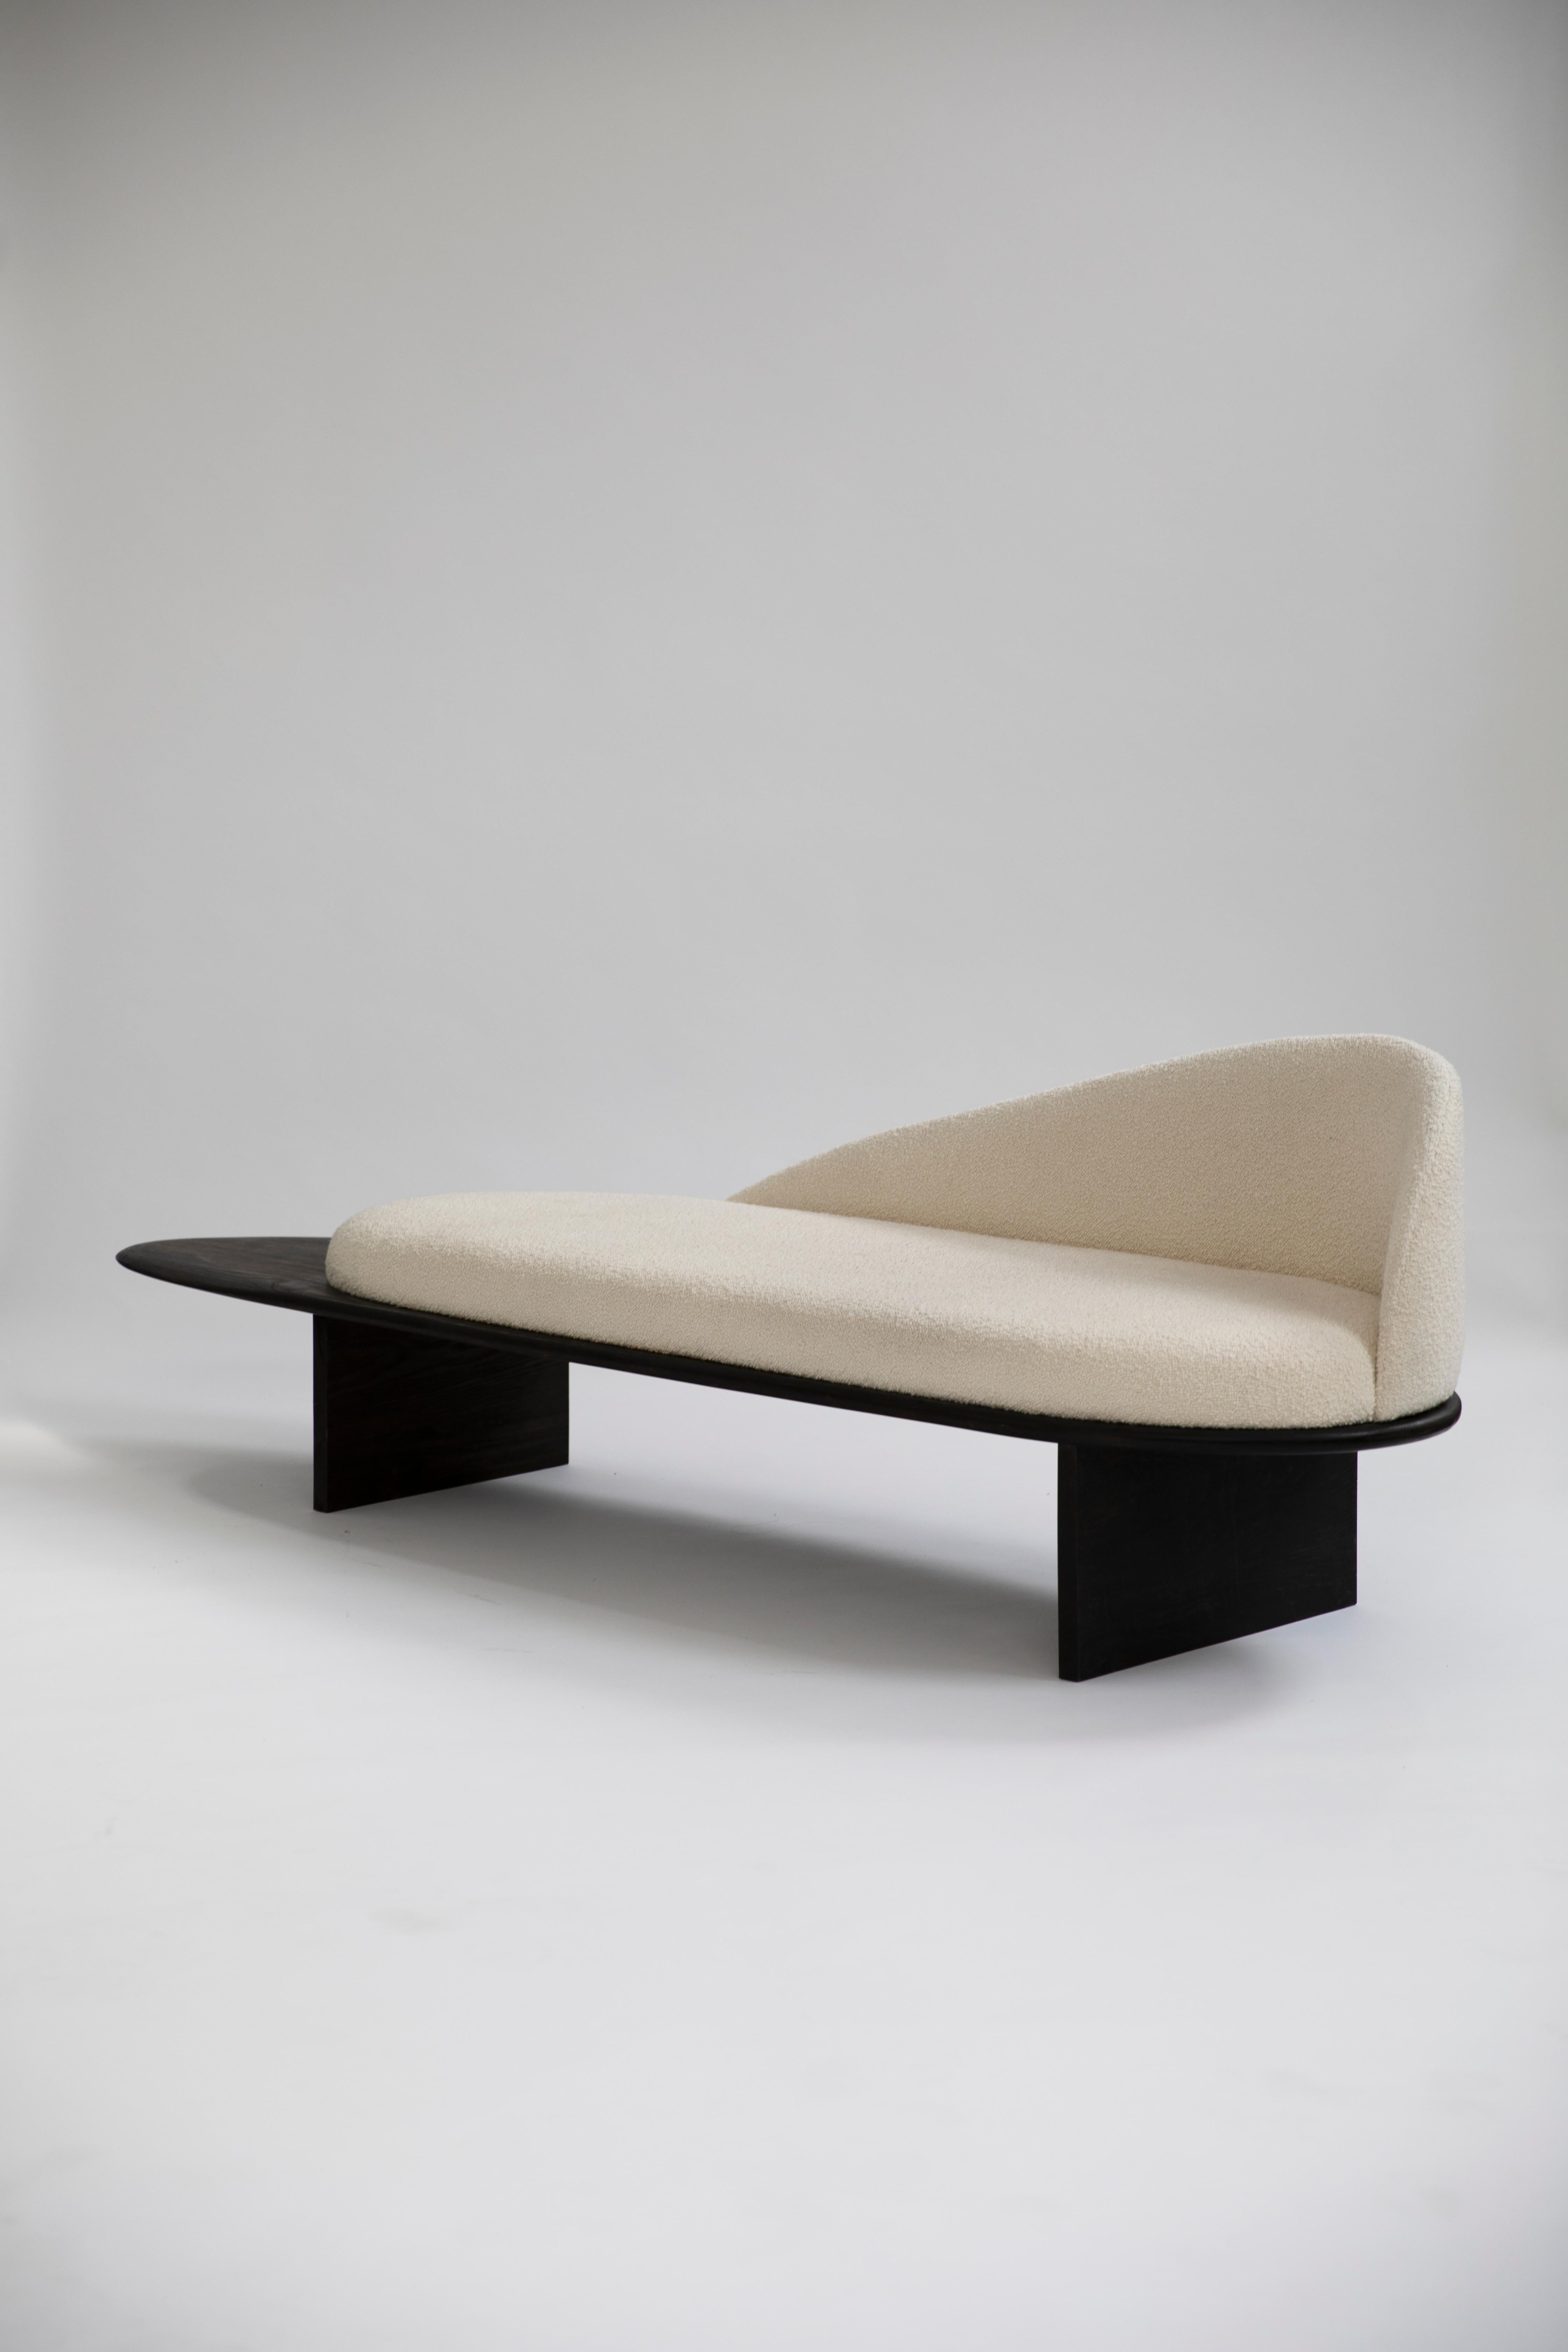 Pebble Chaise longue by Fred Rigby Studio
Dimensions: L 200 x W 60 x H 70 cm
Materials: Solid Oak, Dedar Boucle Weave Wool, Natural Ebonised and Oil

Fred Rigby Studio is a London-based furniture and interior design practice founded by Fred